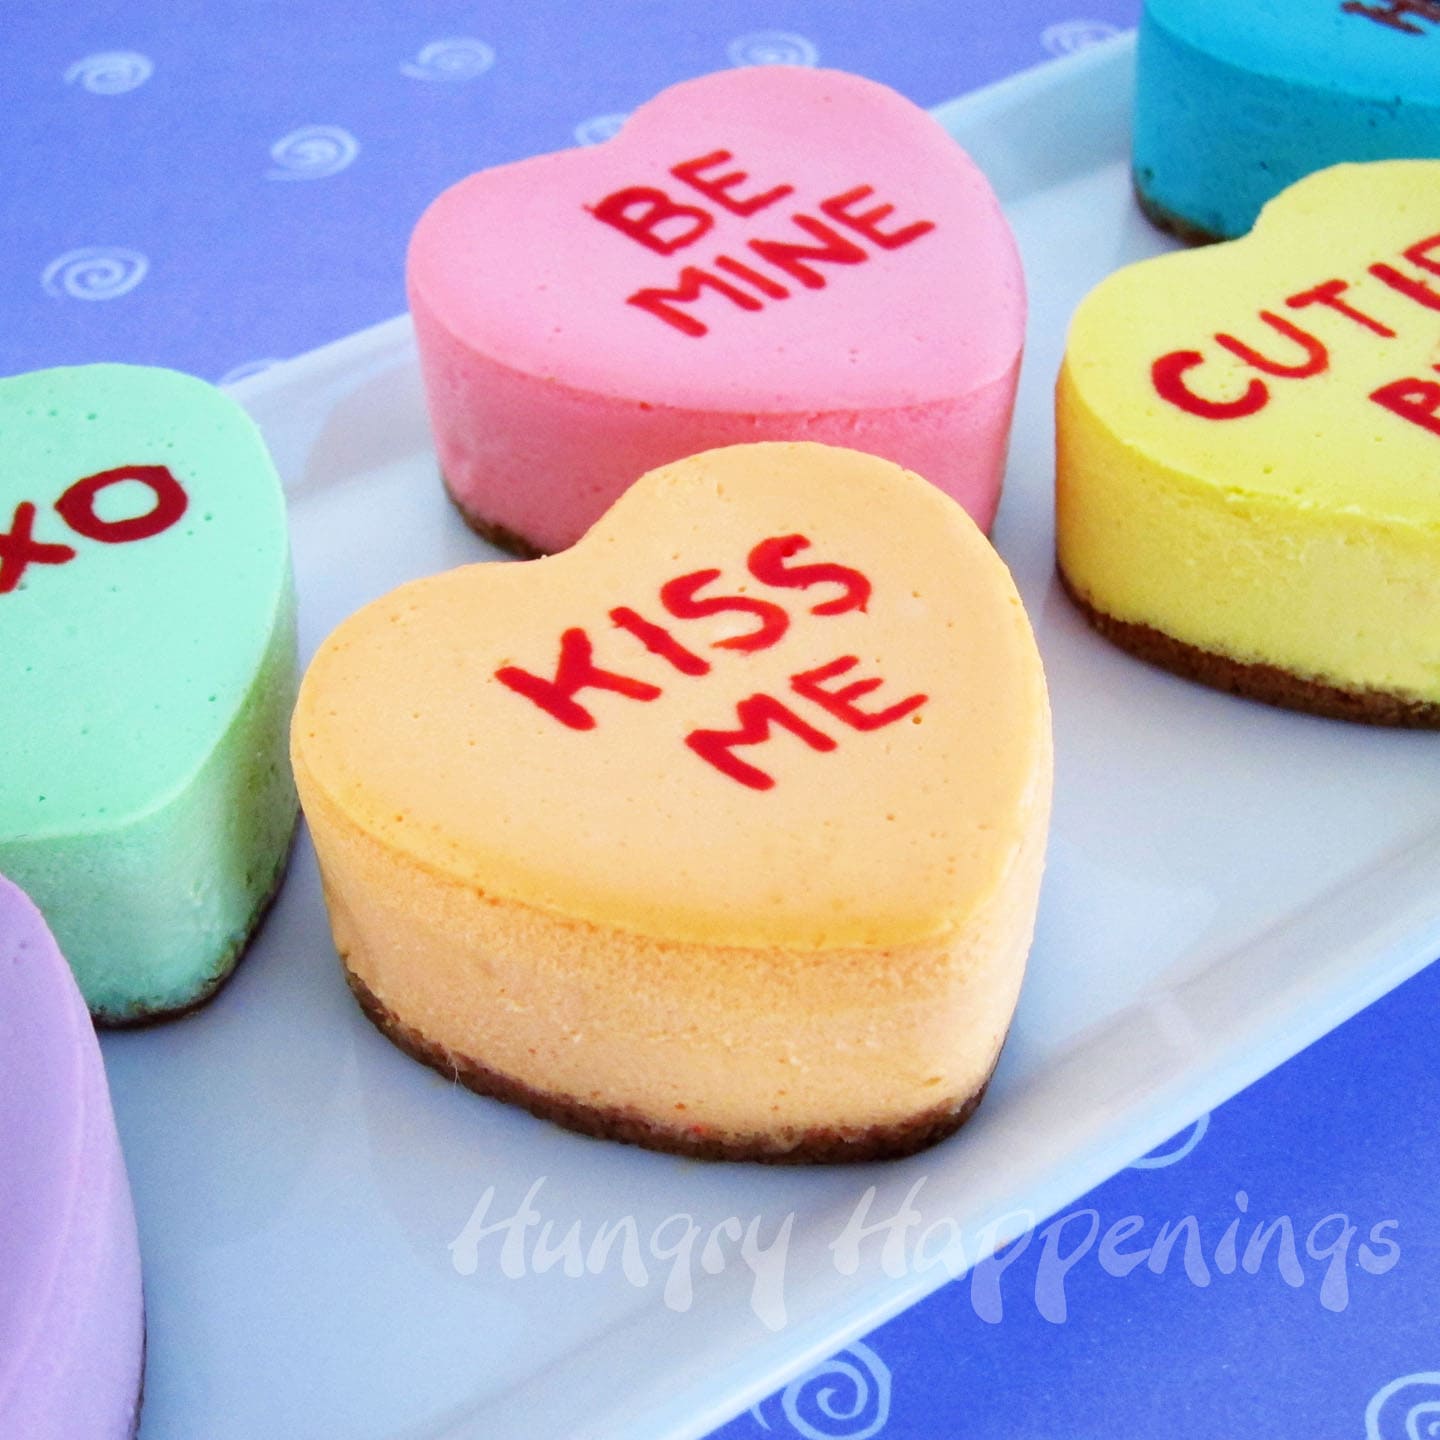 homemade conversation heart cheesecakes decorated with sweet Valentine's Day phrases